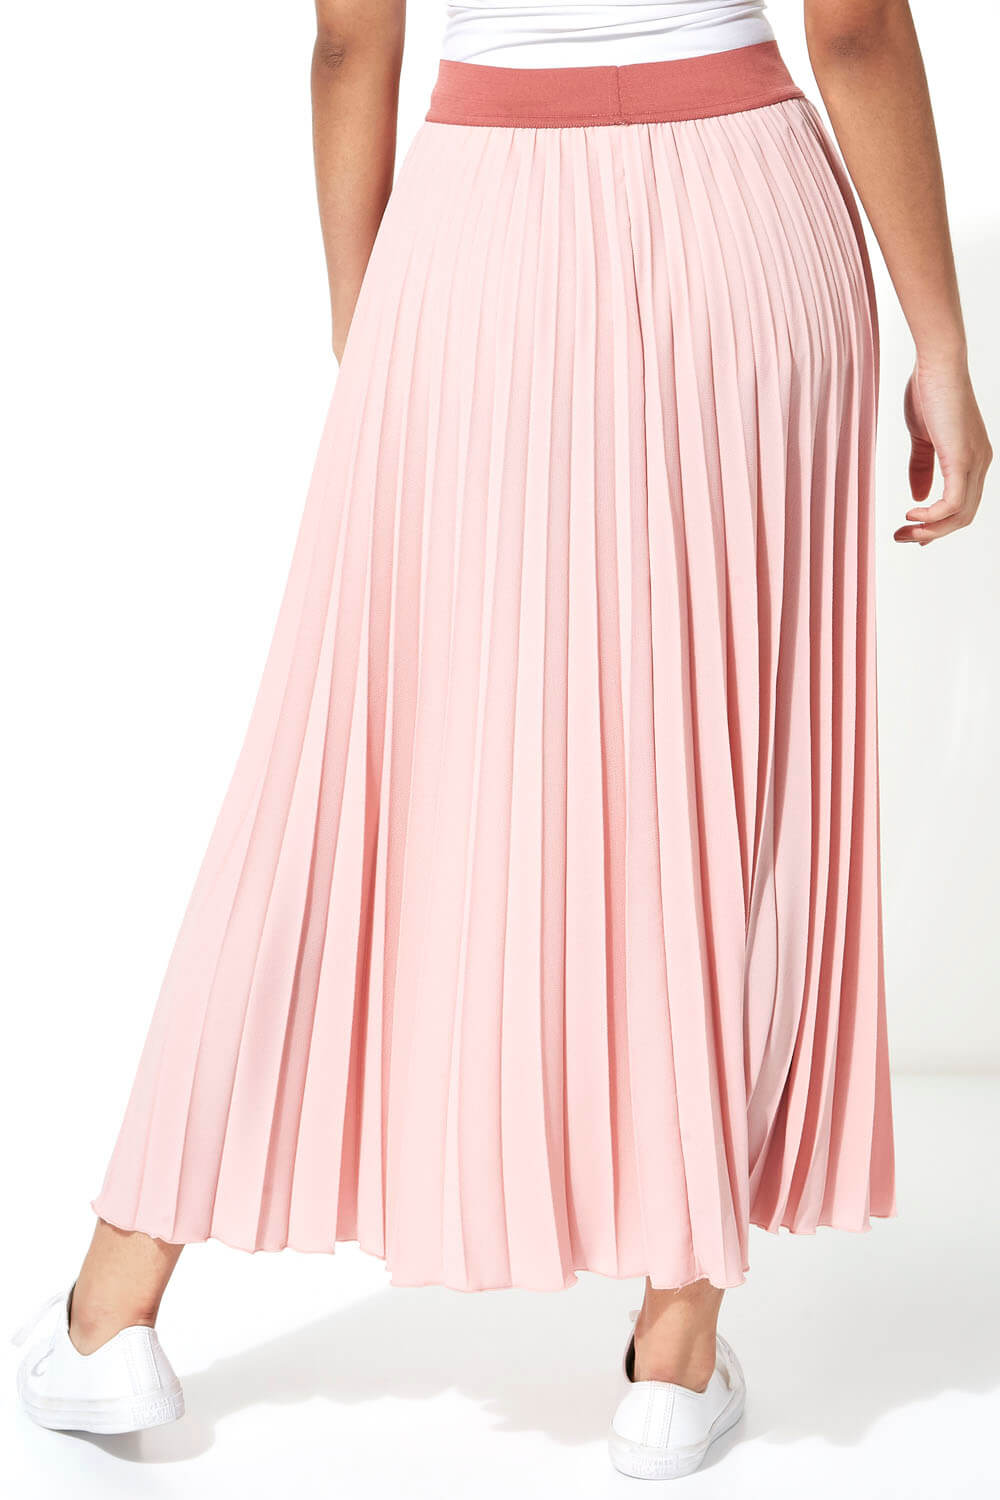 Contrast Band Pleated Maxi Skirt in Light Pink - Roman Originals UK